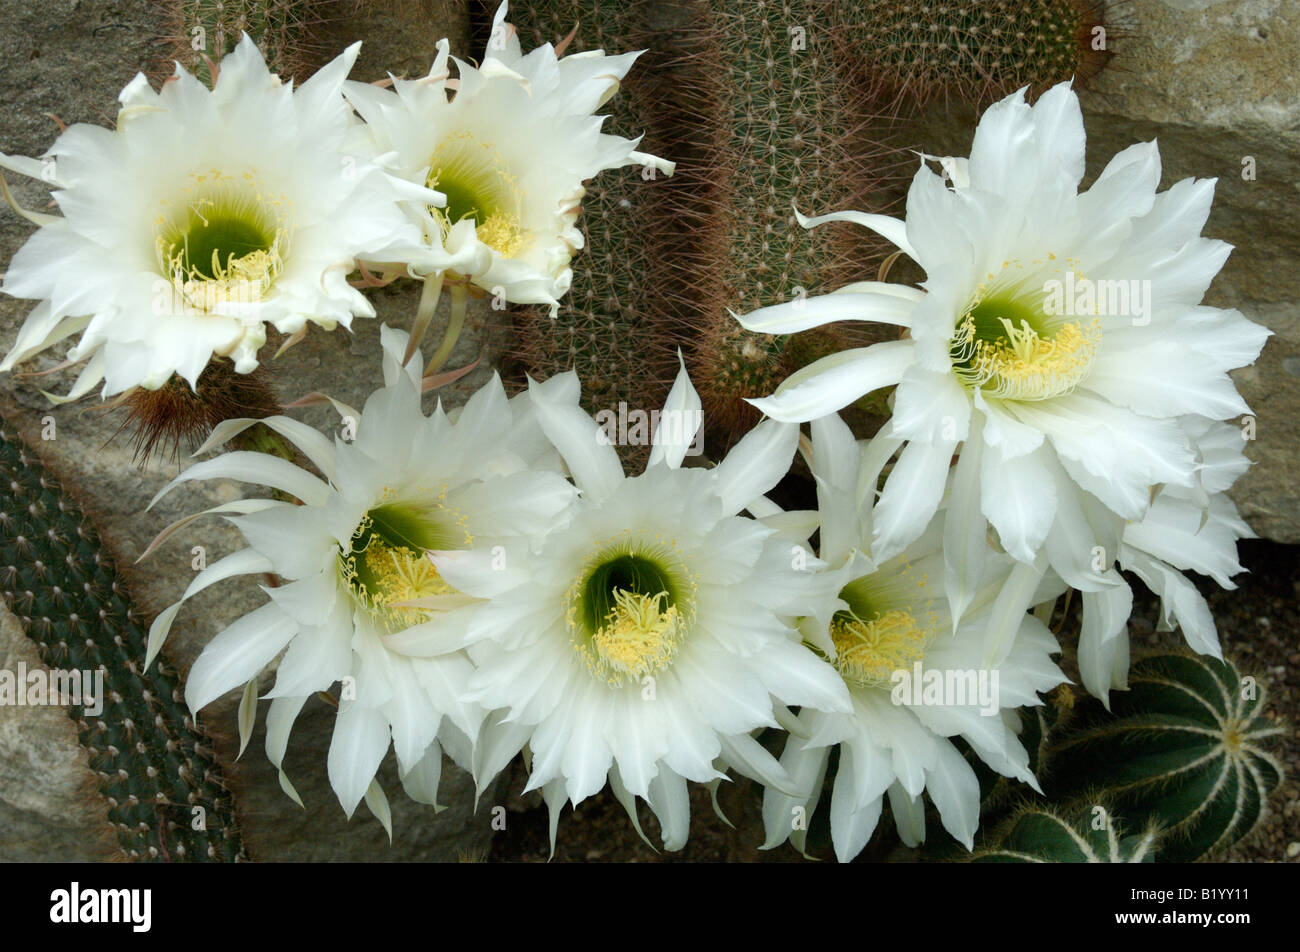 A bunch of flowers on a Echinopsis Huascha cactus plant Stock Photo